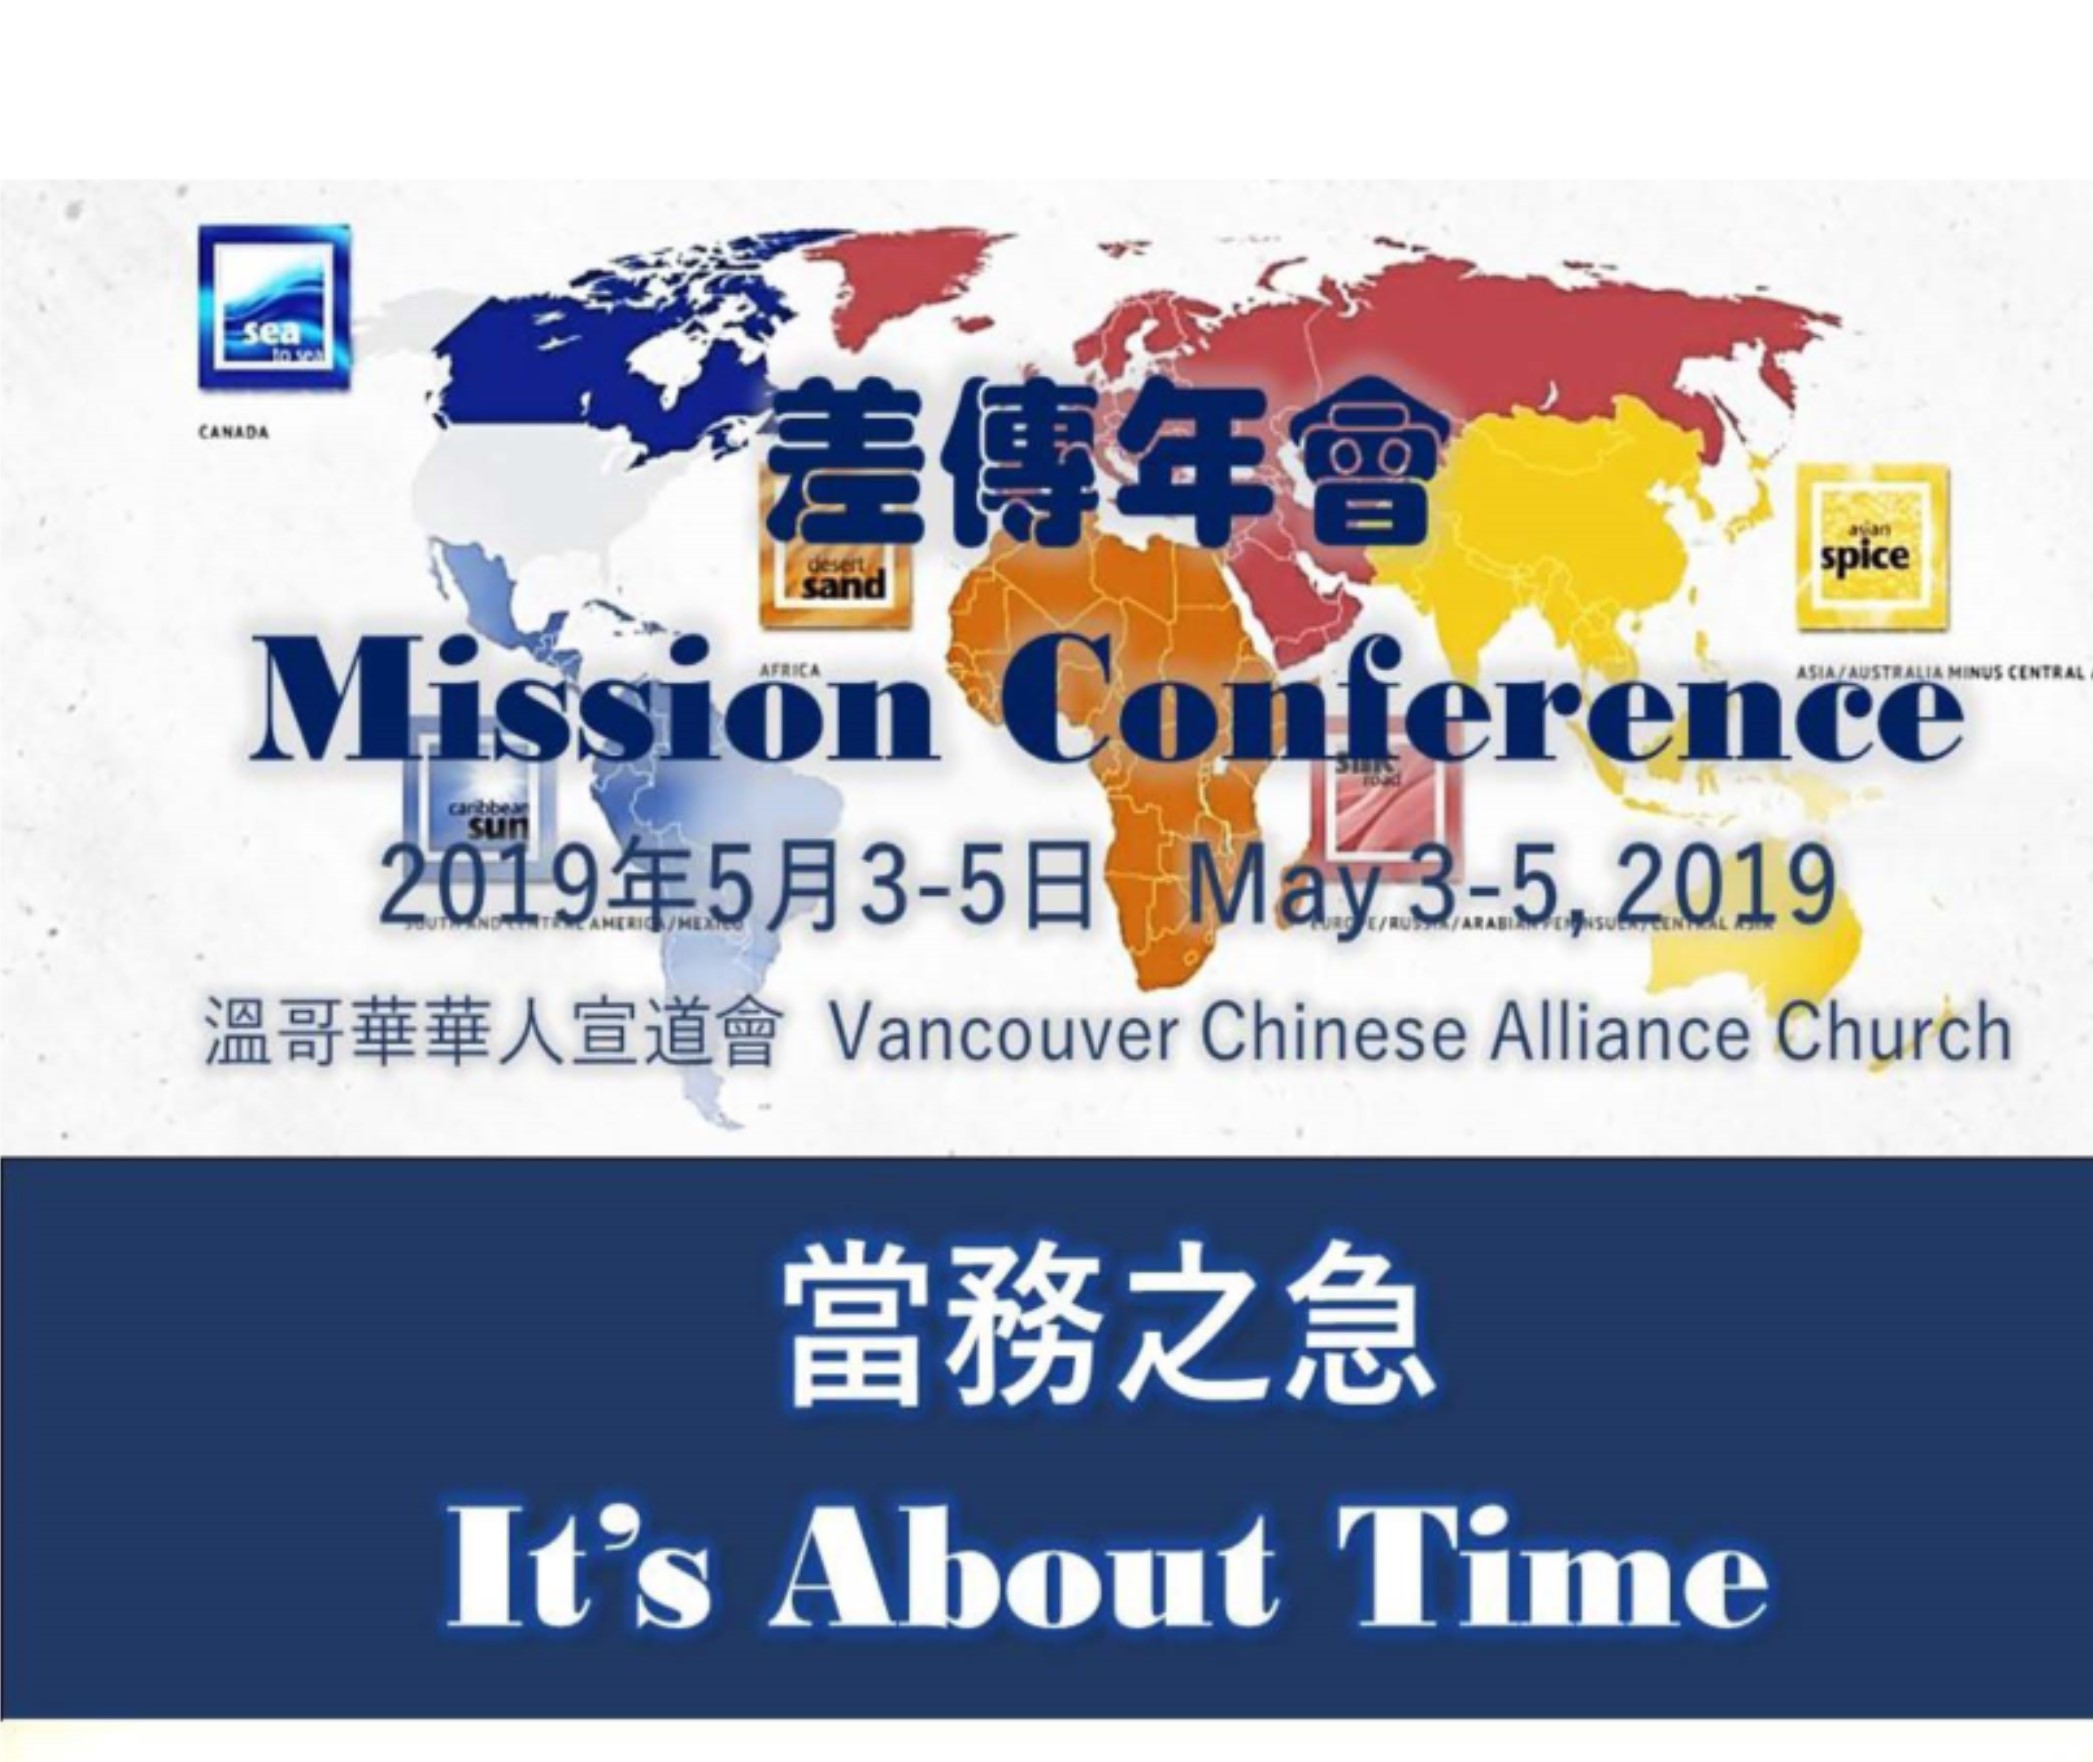 Mission Conference - It's About Time